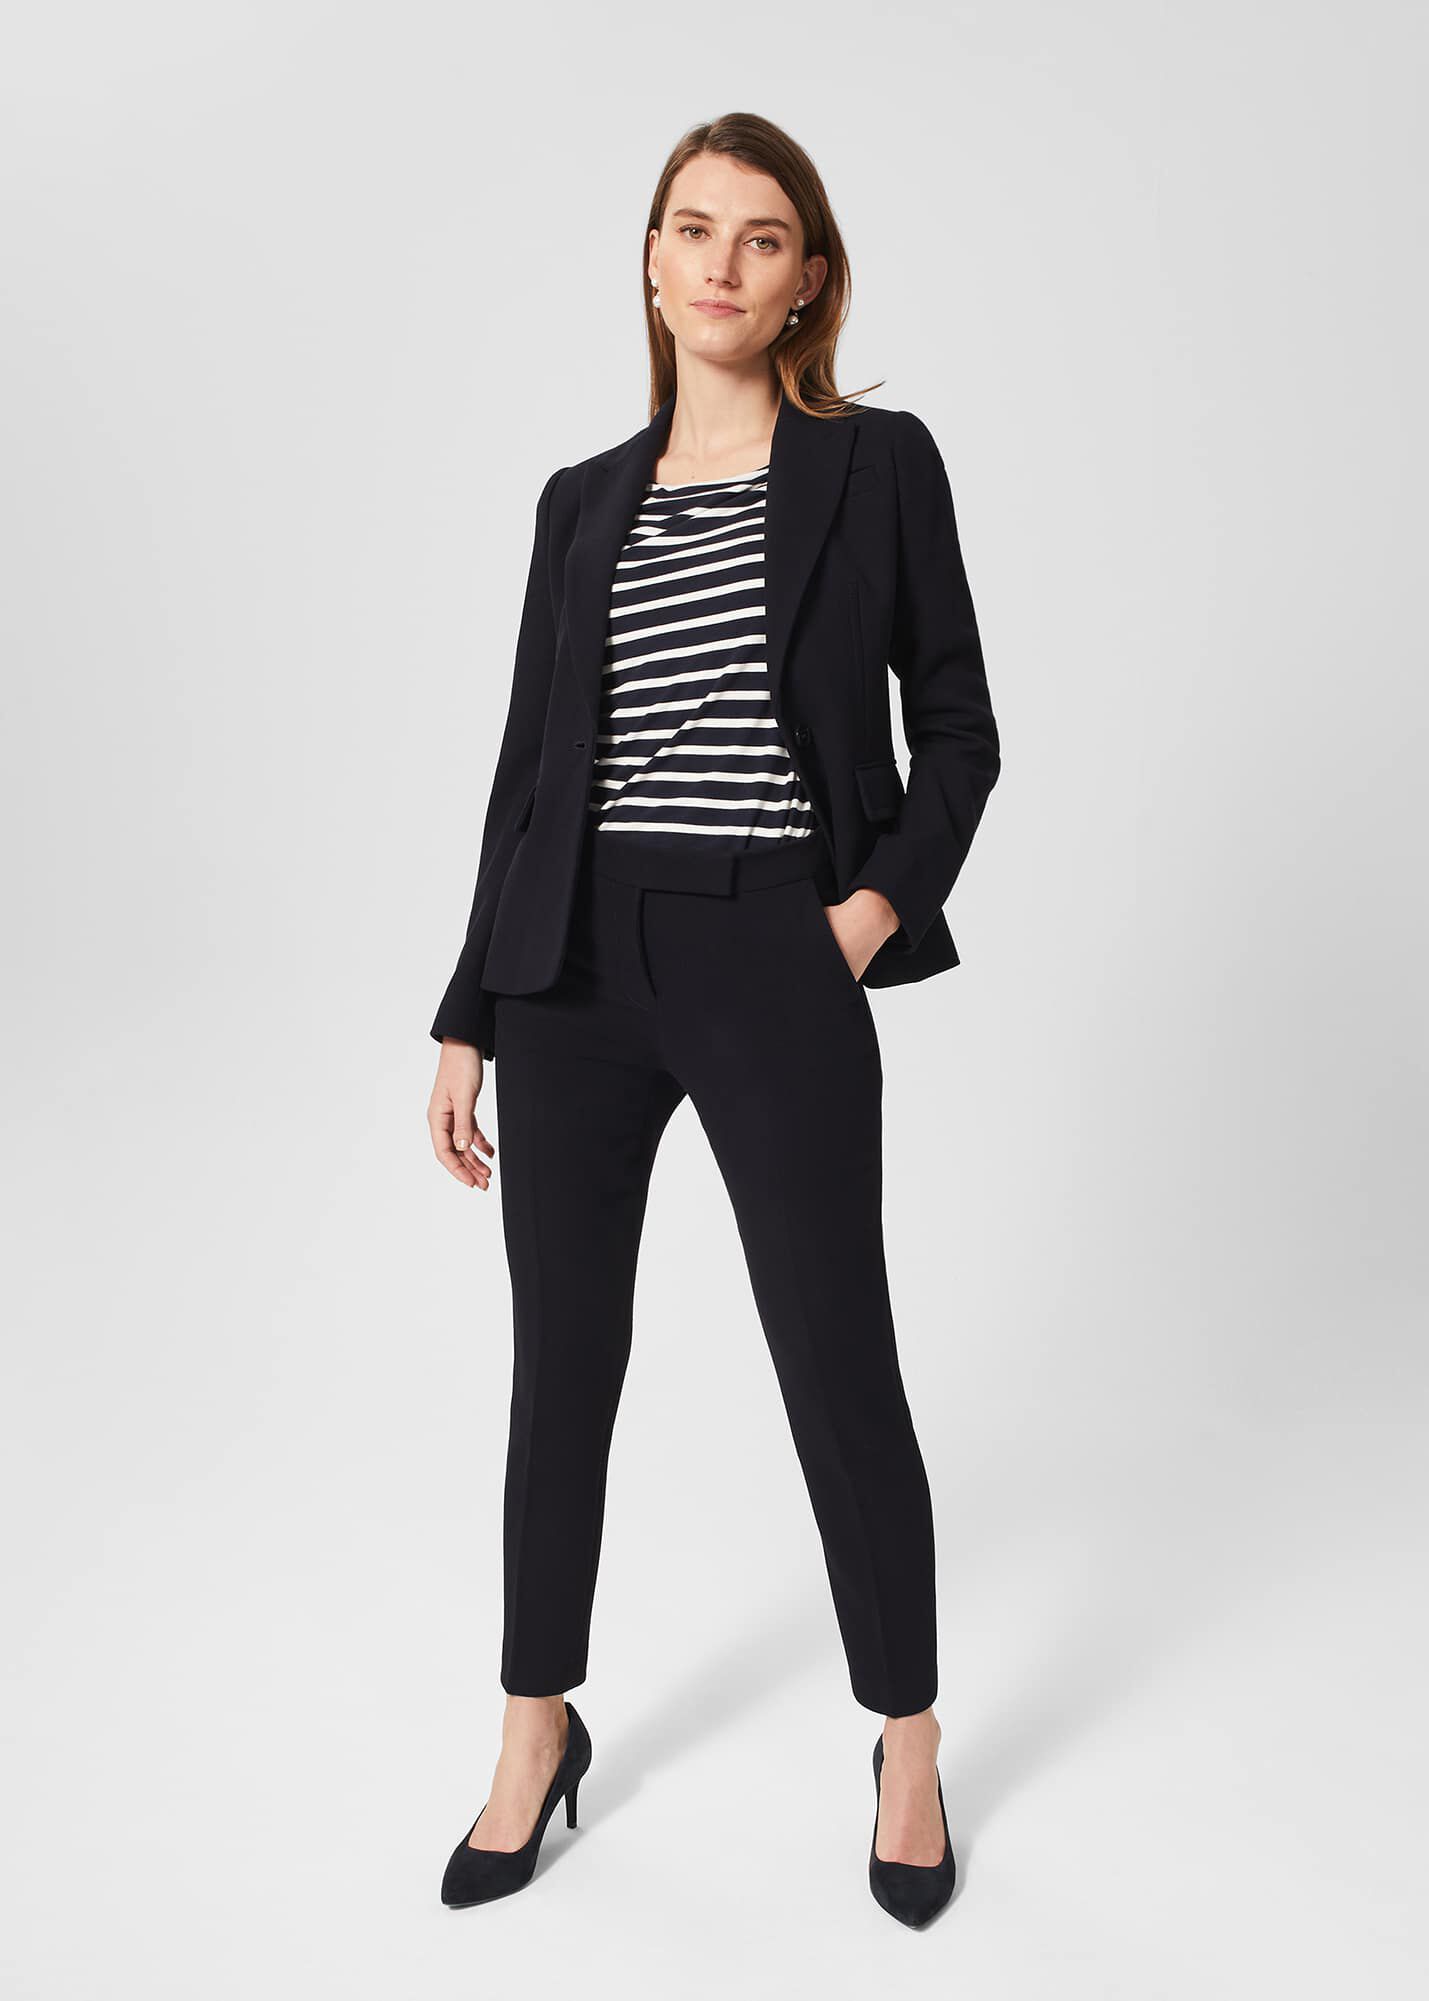 Boohoo Plunge Fitted Blazer  Flared Pants Suit in Pink  Lyst UK